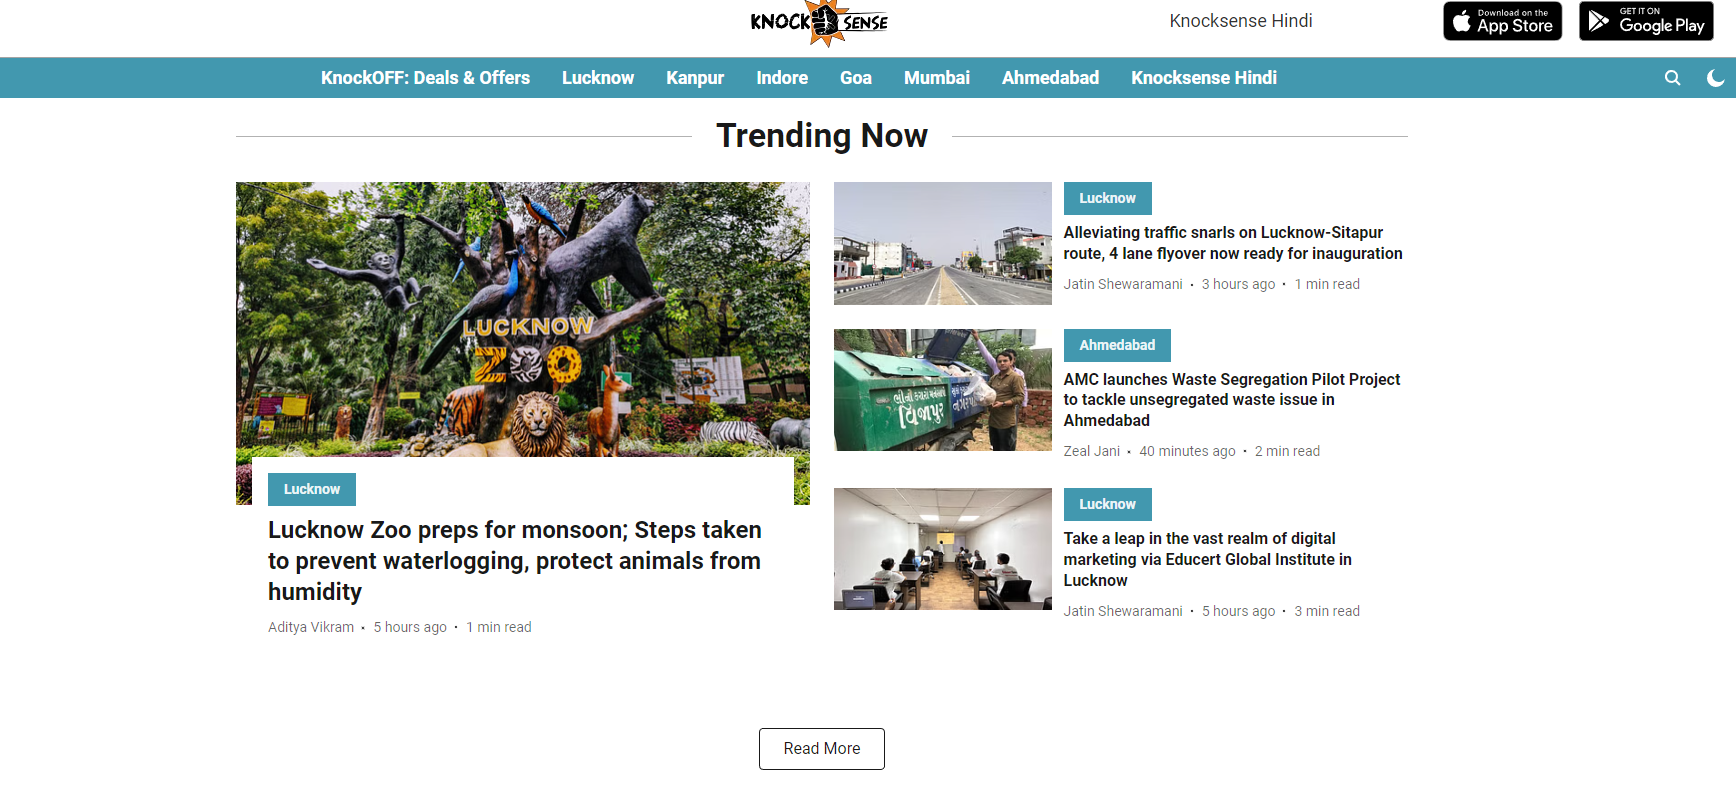 With a significant $1M raised in their Pre-Series A funding, Knocksense is revolutionizing the way we access local news.